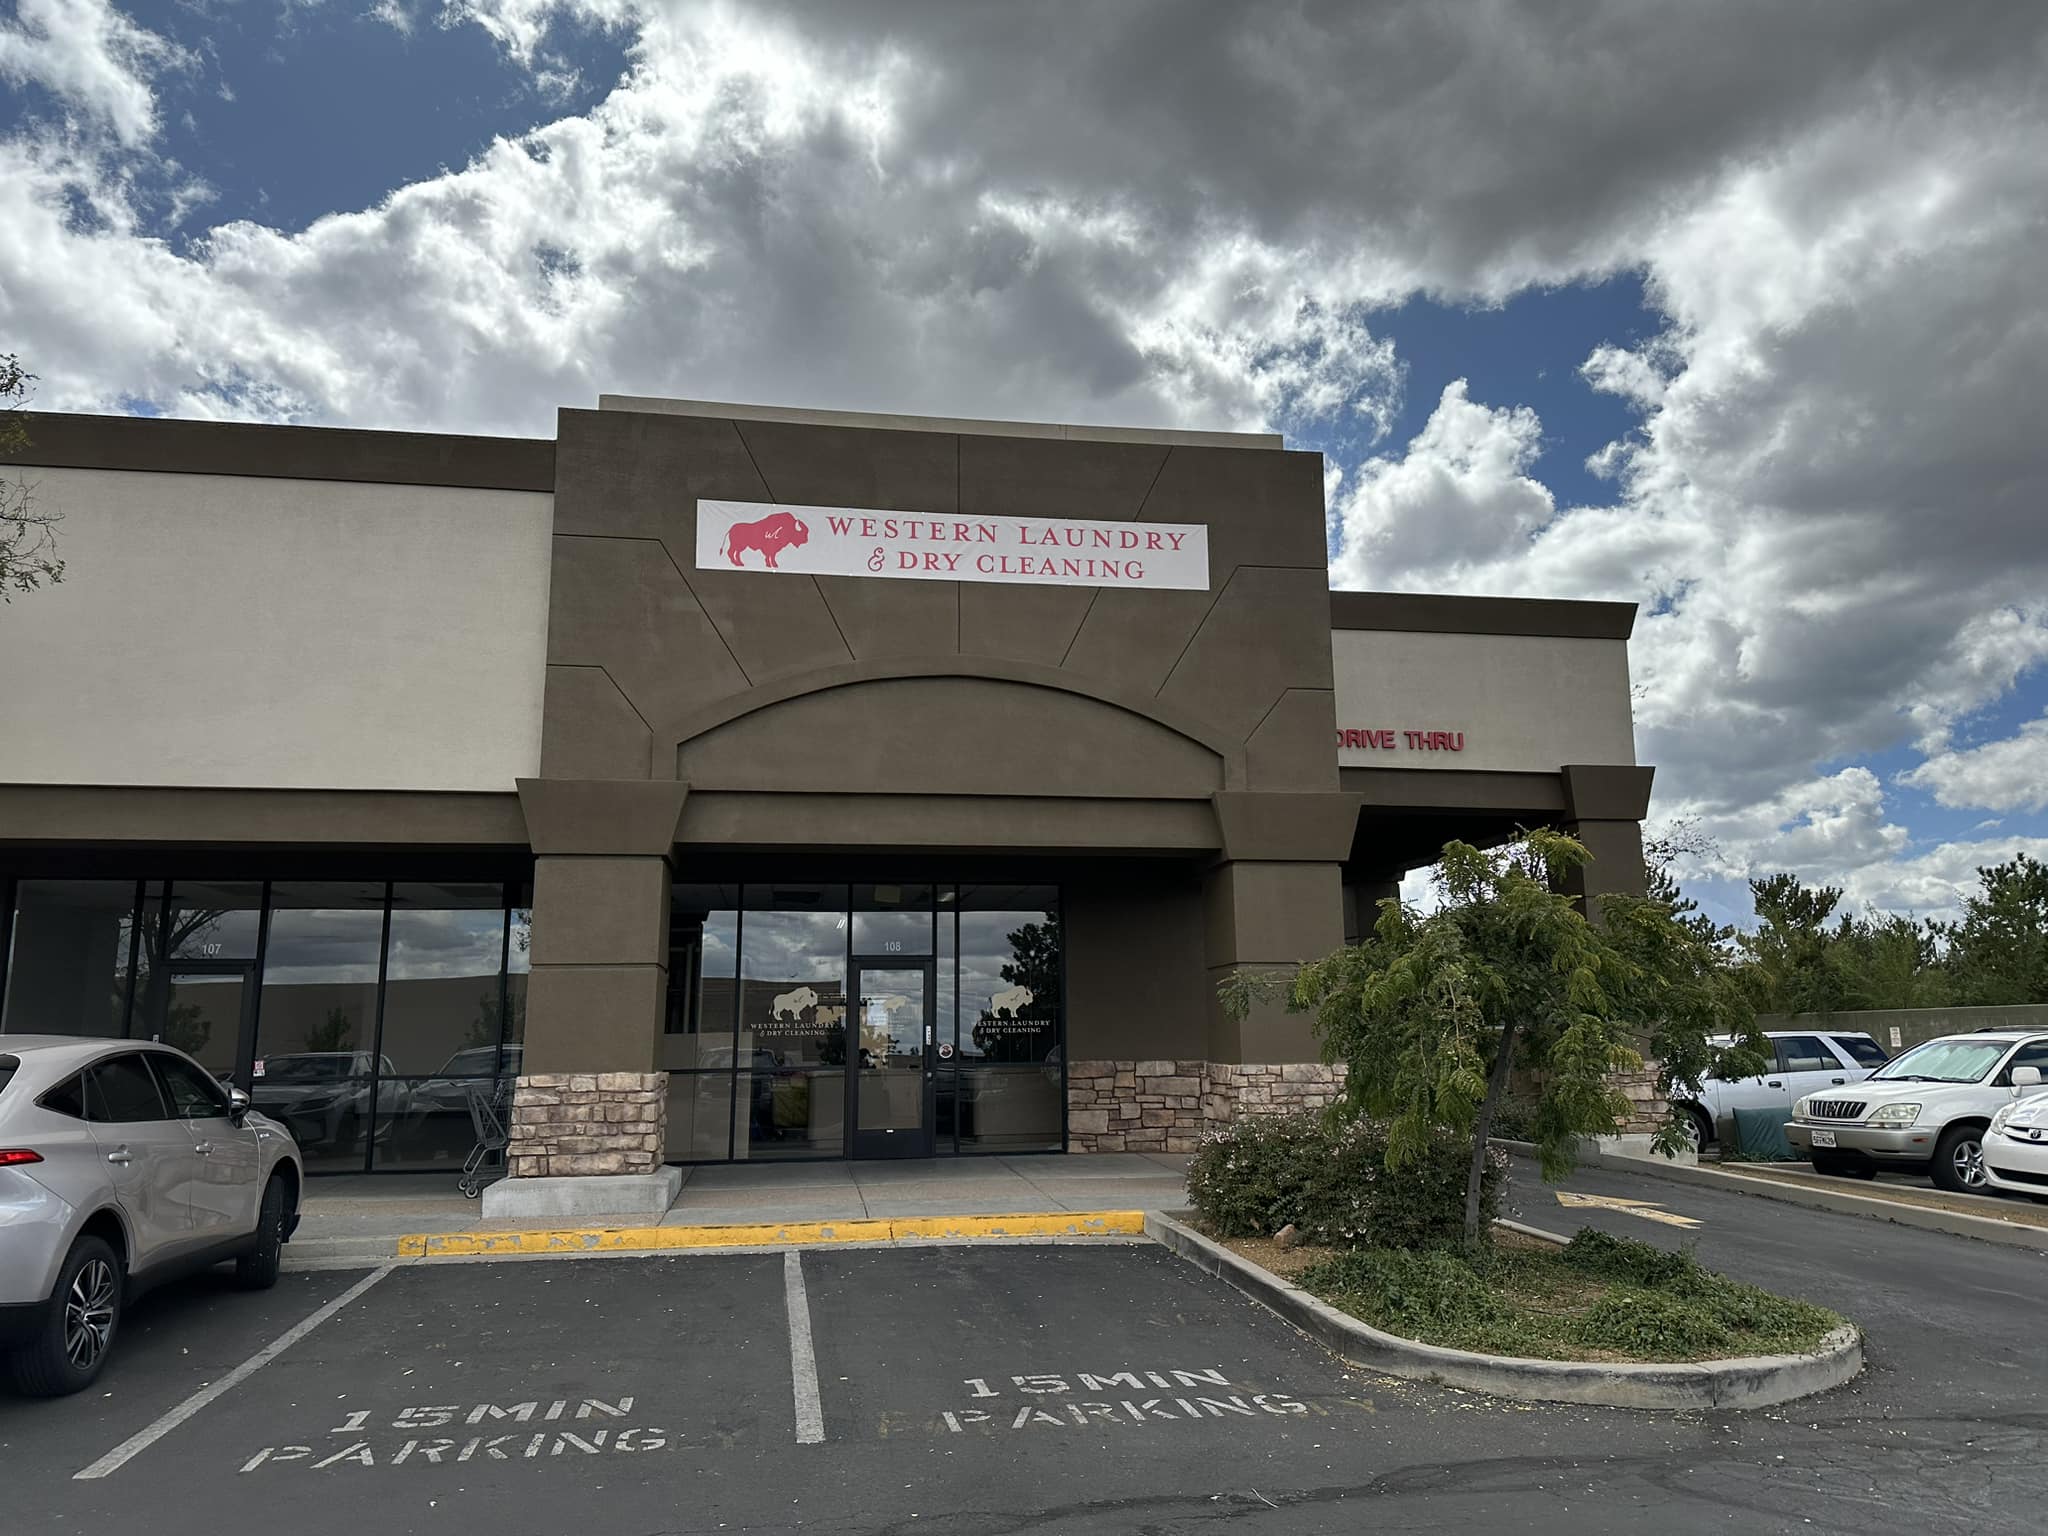 western laundry and dry cleaners, laundry, dry cleaner, Prescott valley, Prescott, fain signature group, new business, tenant, real estate